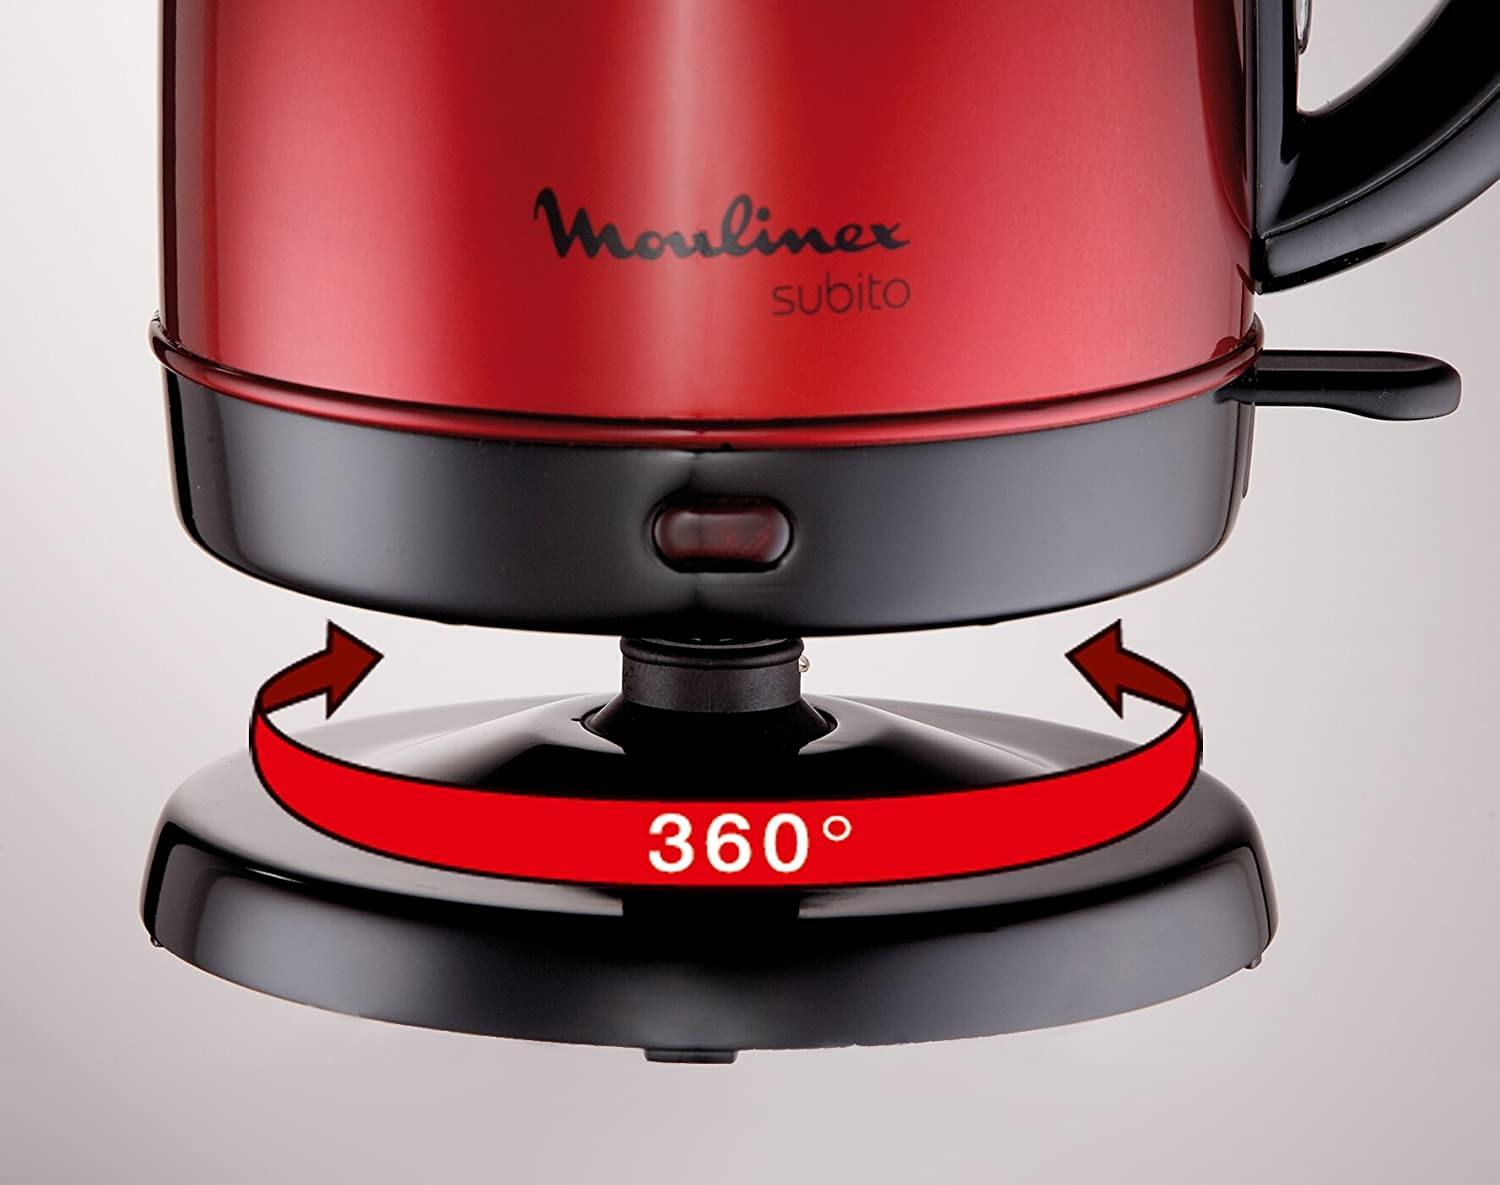 Moulinex Subito Kettle, 1.7l, 2400w (Red Metallic/Black) - Whole and All